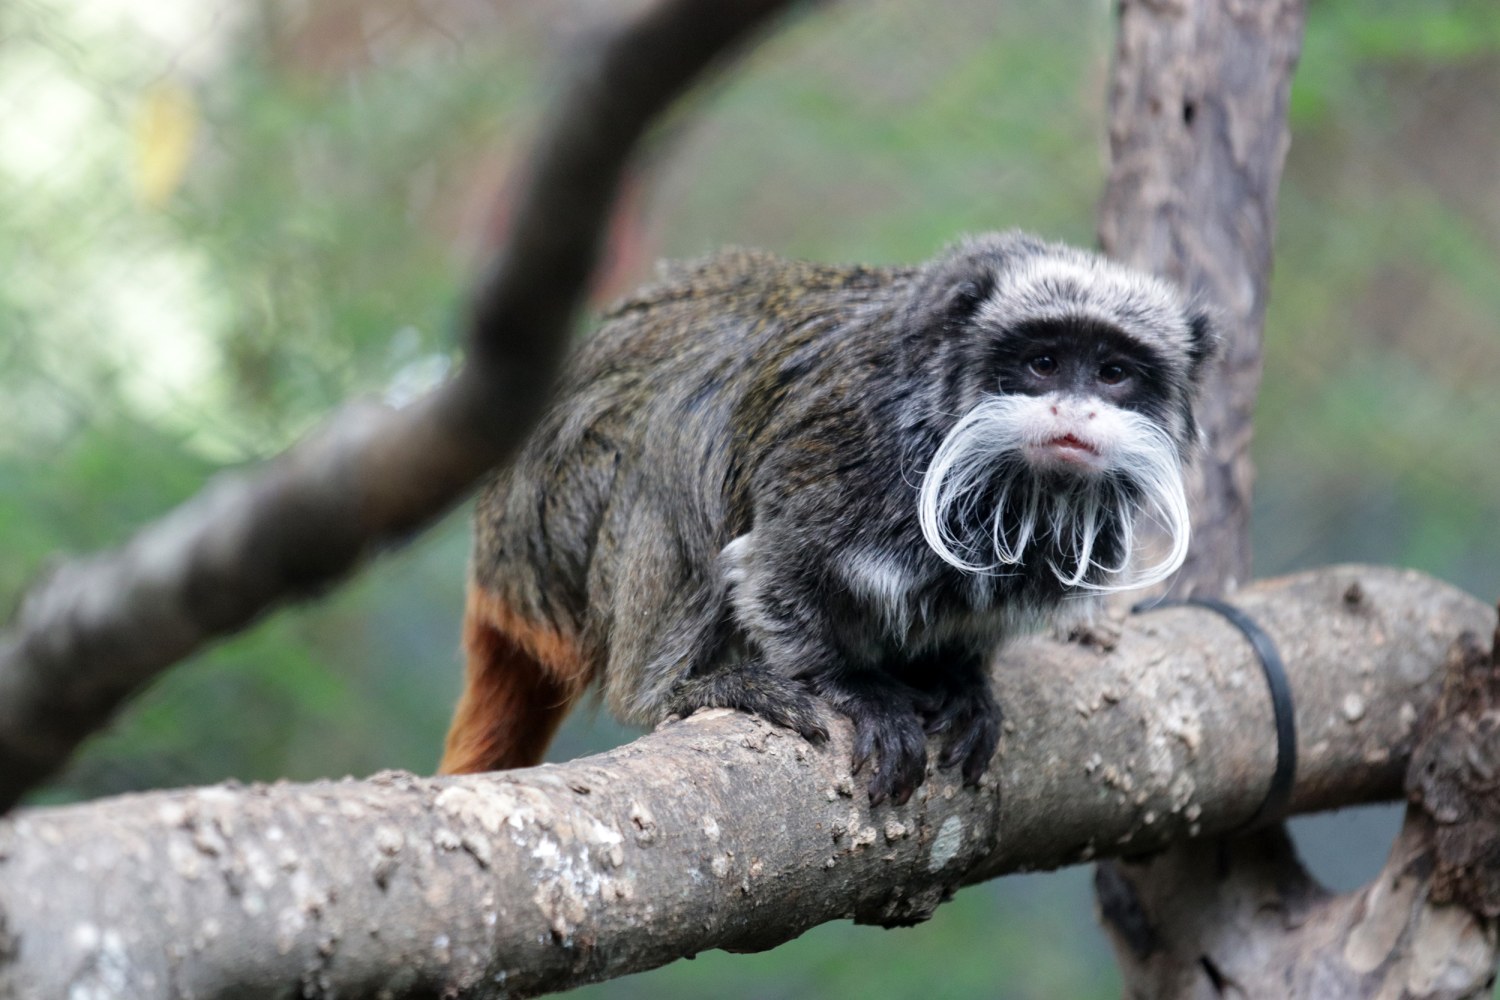 Dallas Zoo mystery deepens as missing tamarin monkeys are found in closet of abandoned home hq nude photo